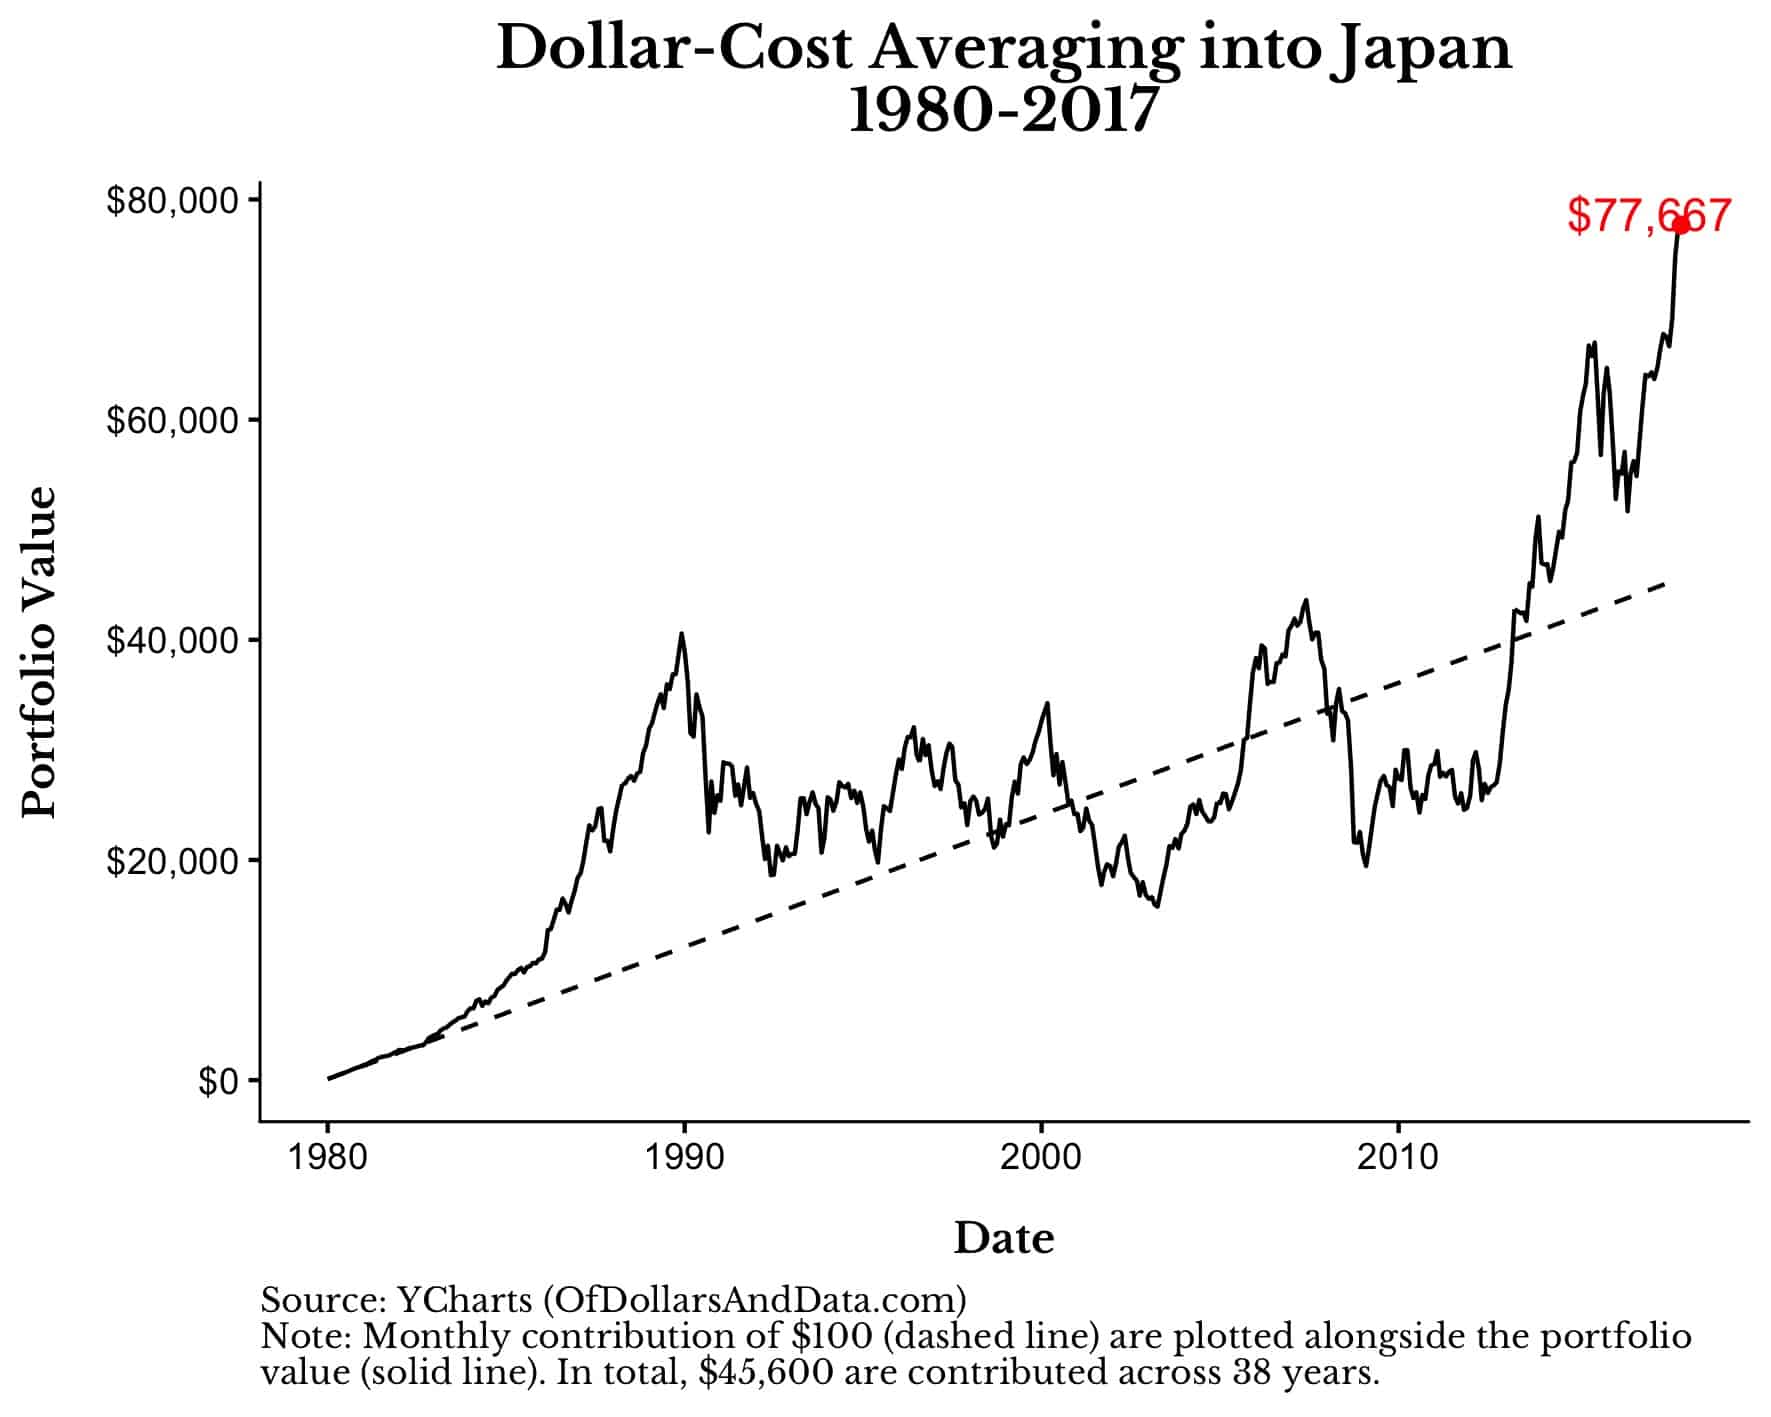 Dollar cost averaging into Japanese stock market from 1980-2017